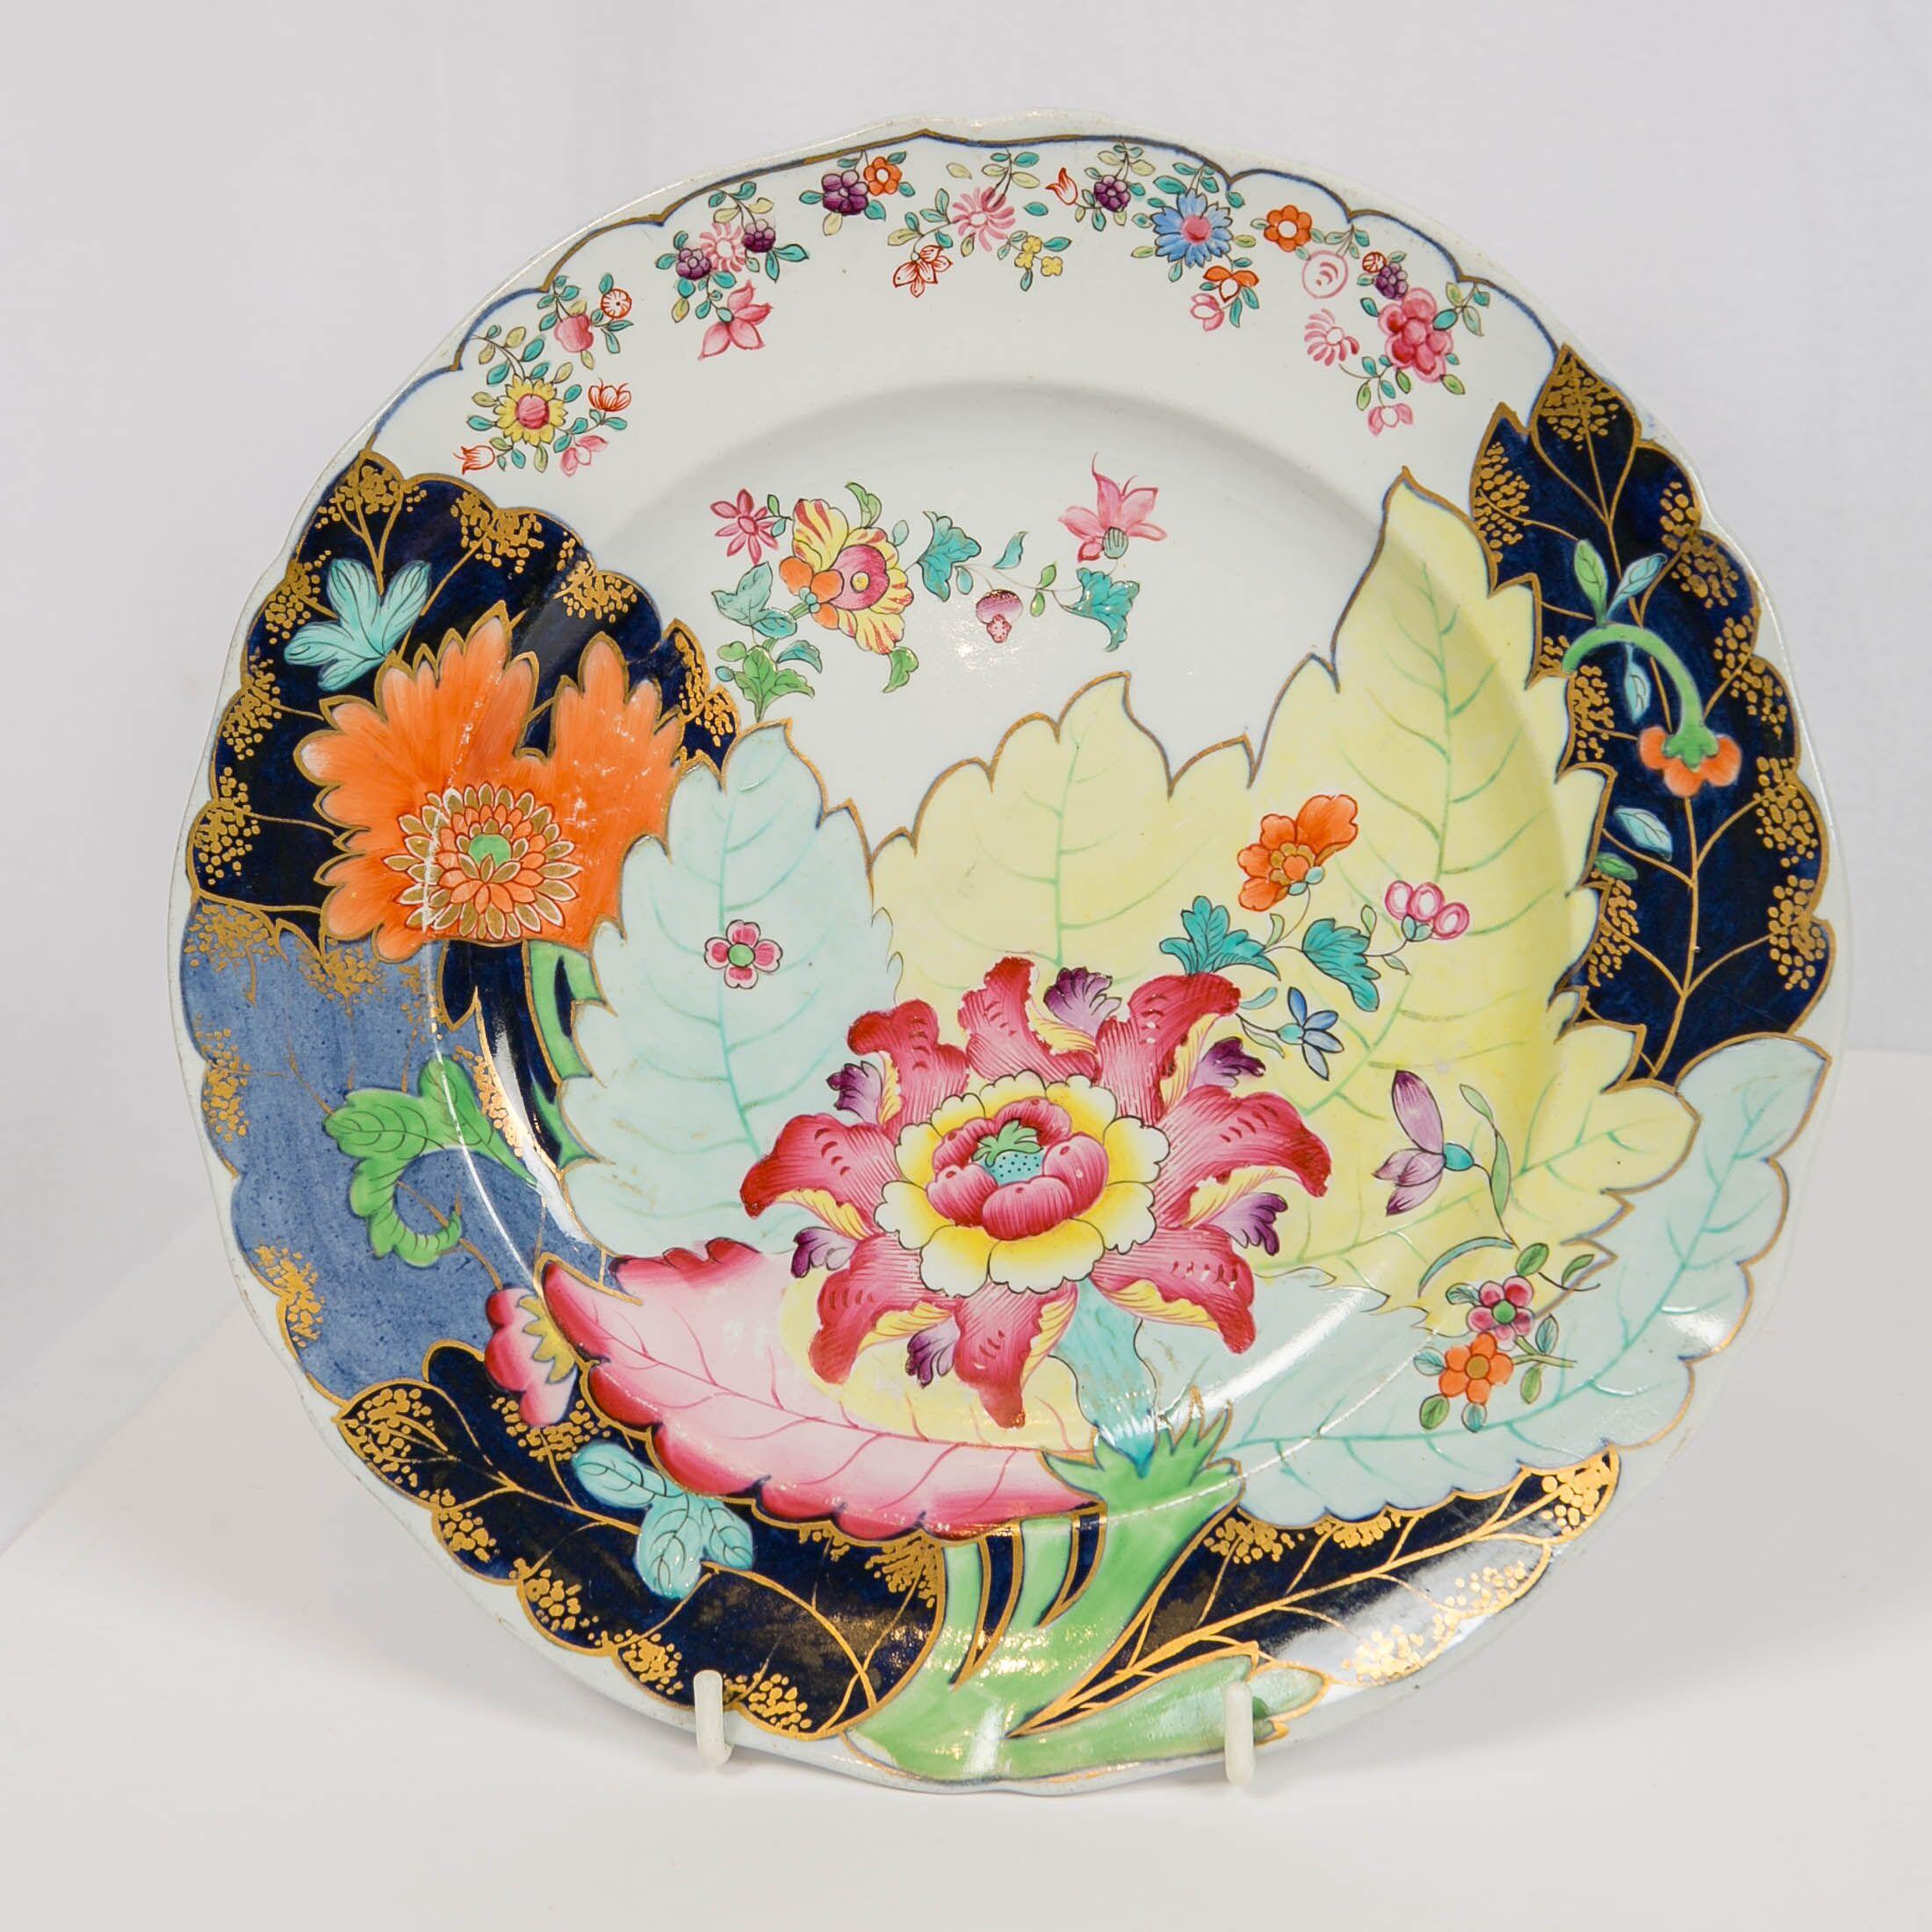 19th Century Three Large Tobacco Leaf Plates Made by Spode in England, circa 1820